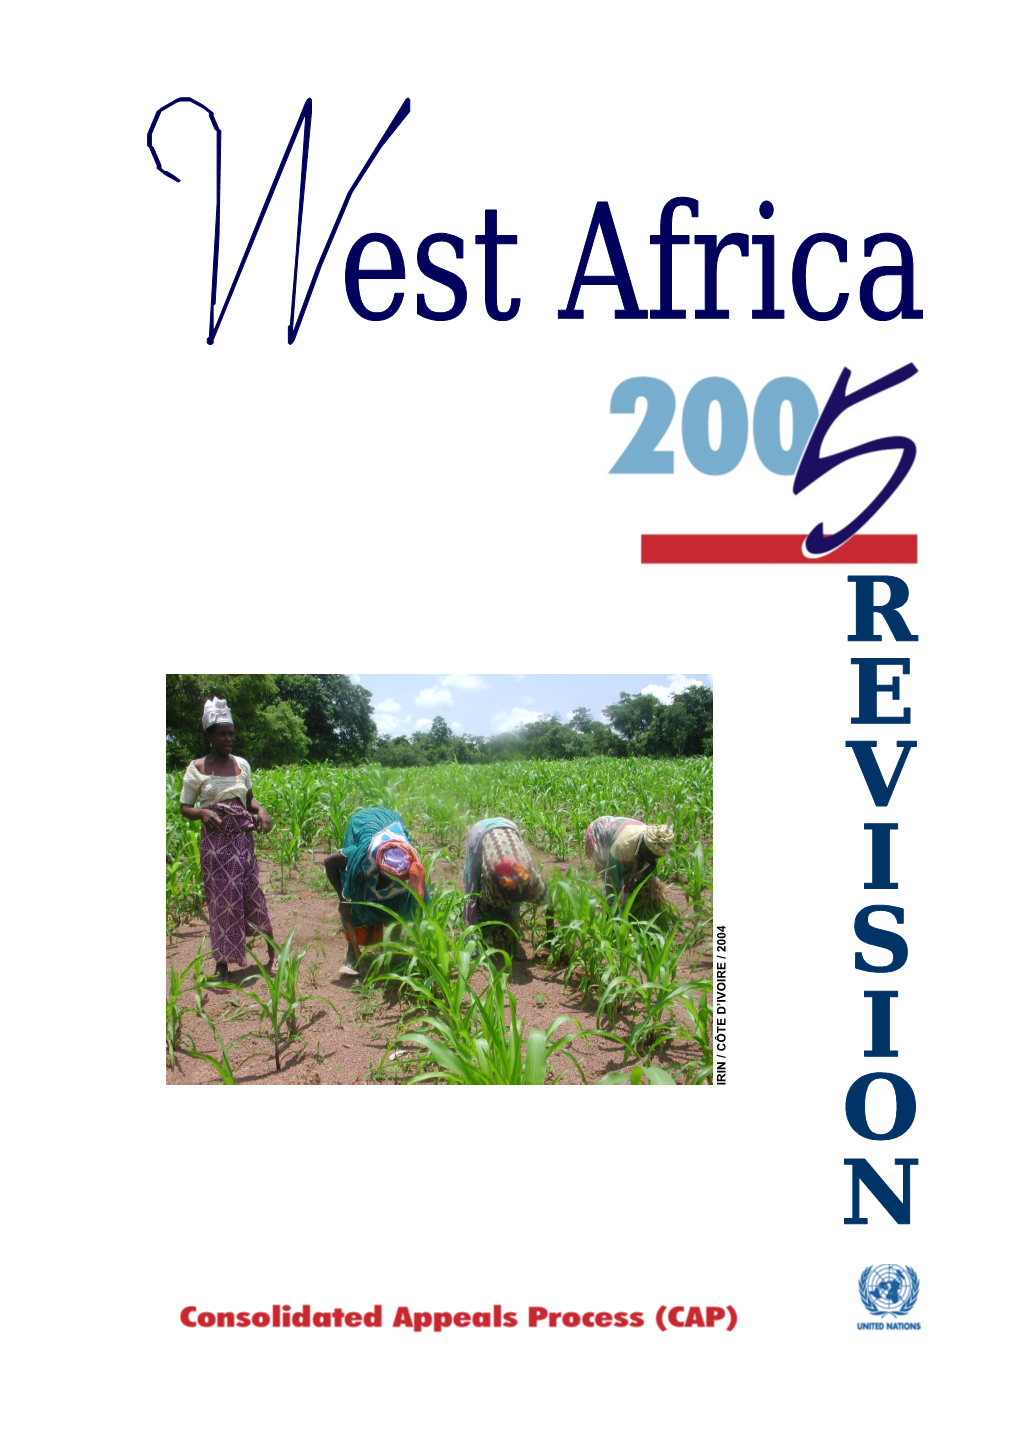 Revision of the Consolidated Appeal for West Africa 2005 (Word)